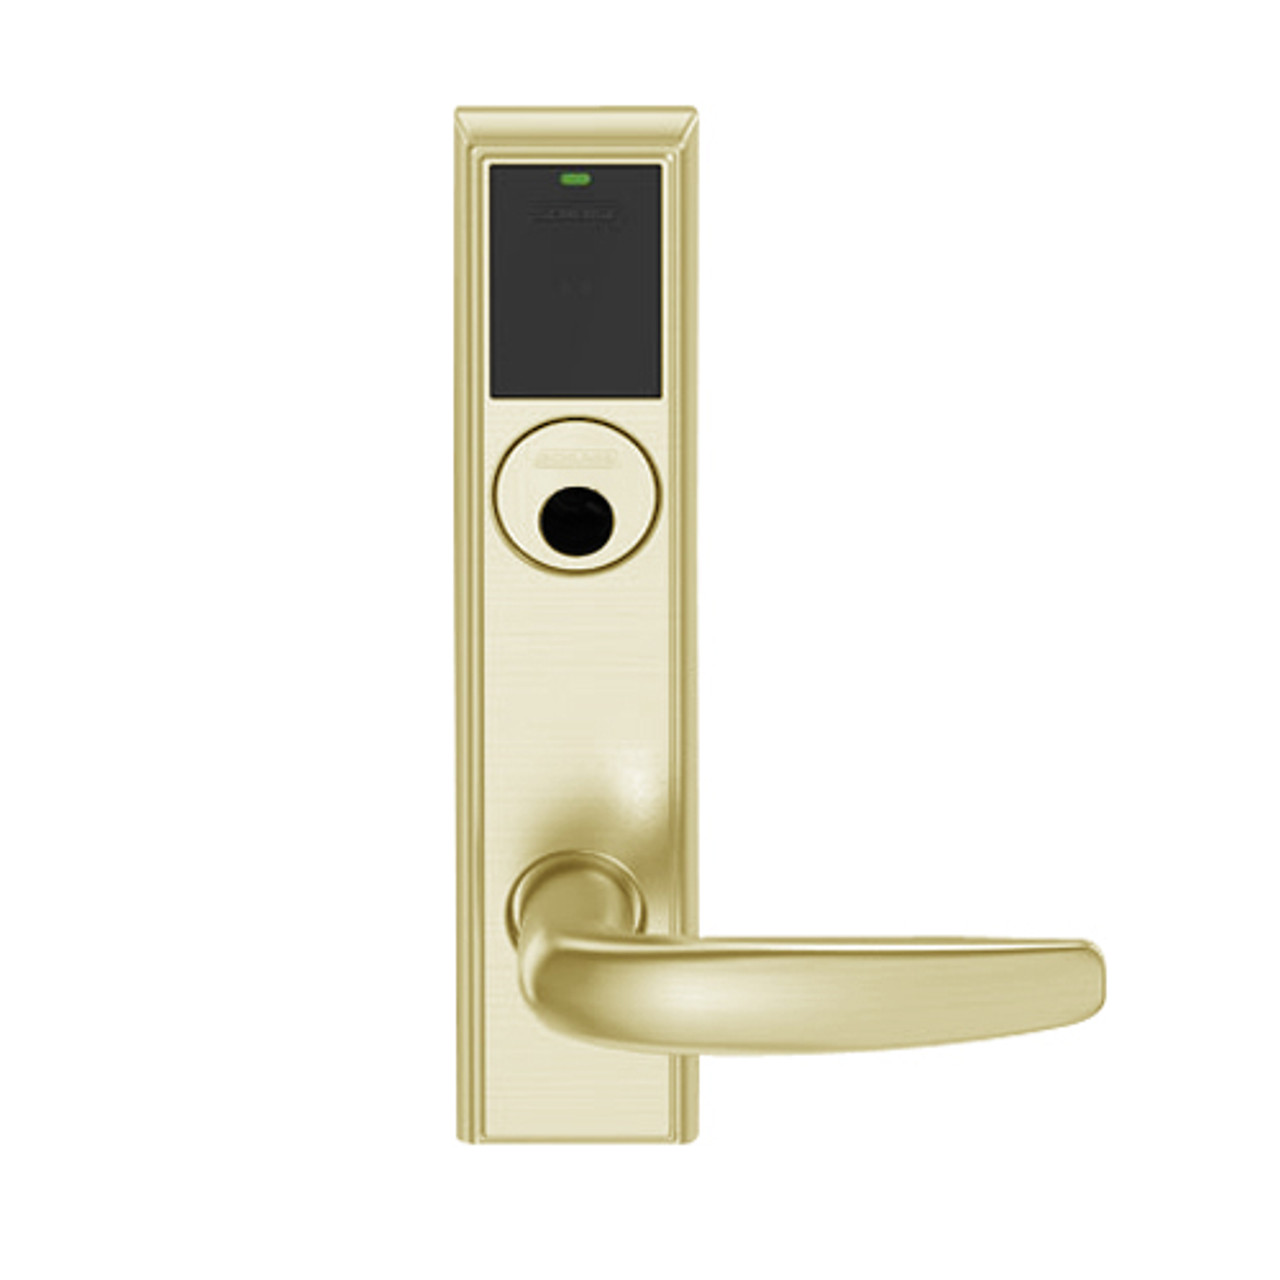 LEMB-ADD-L-07-606 Schlage Less Mortise Cylinder Privacy/Office Wireless Addison Mortise Lock with Push Button, LED and Athens Lever in Satin Brass